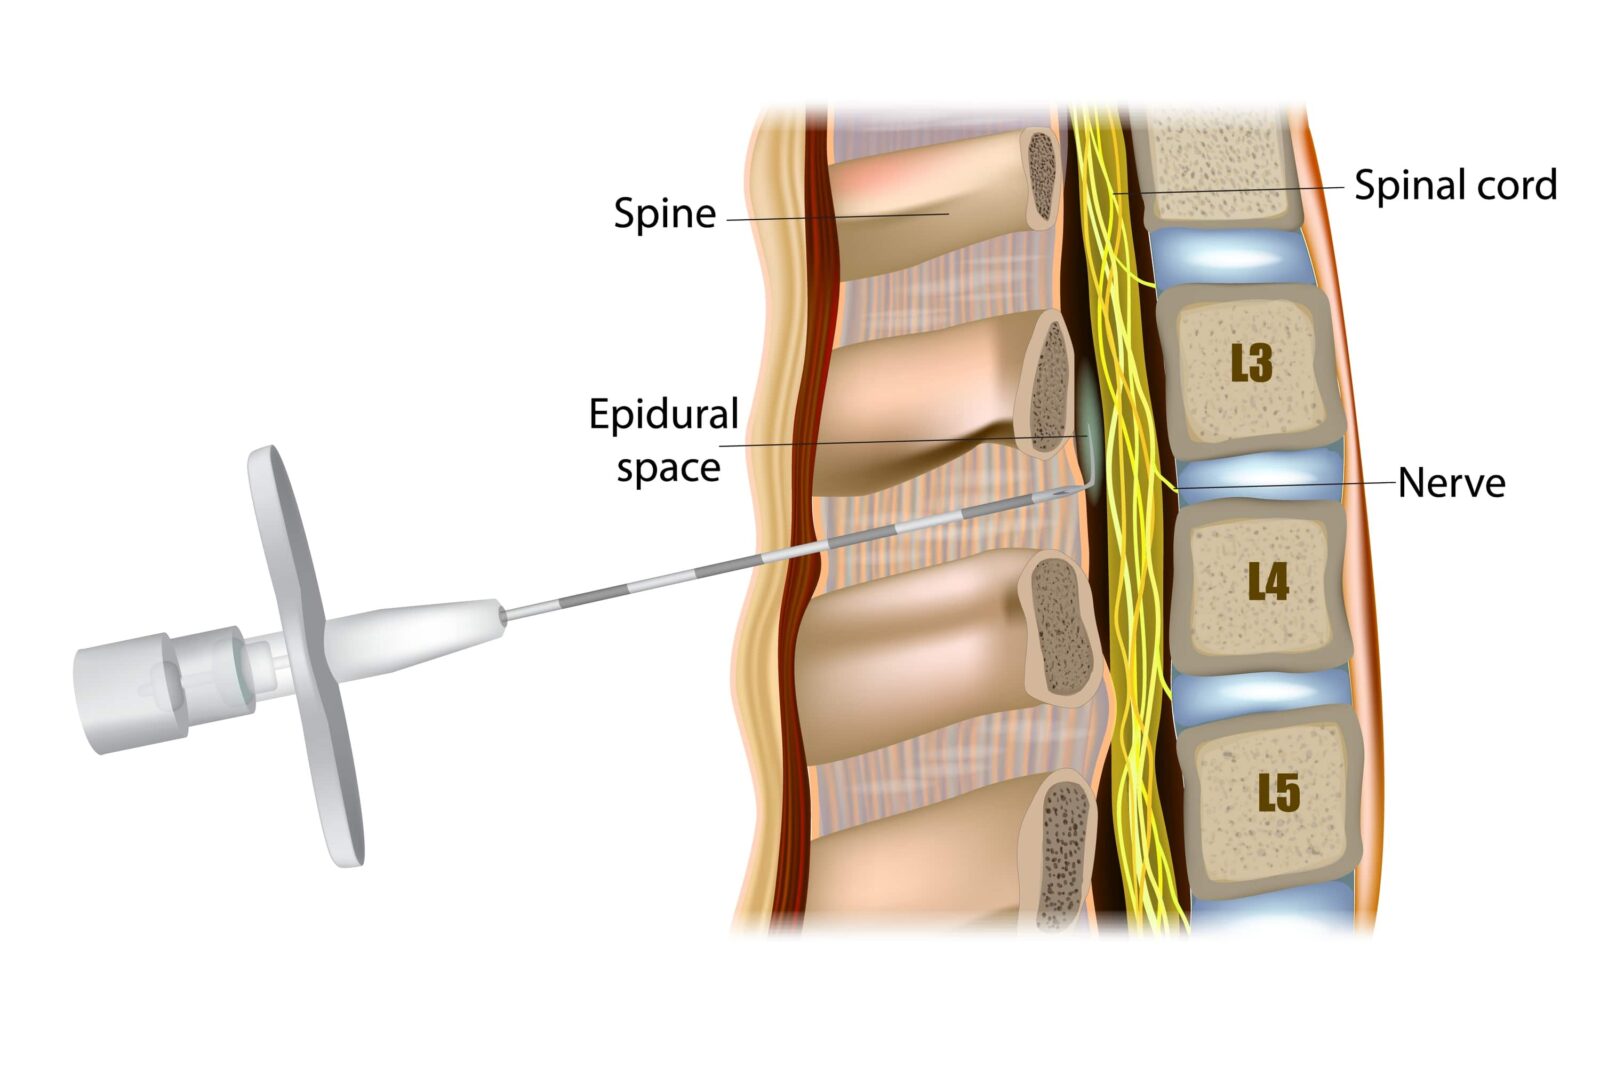 injection into the epidural space